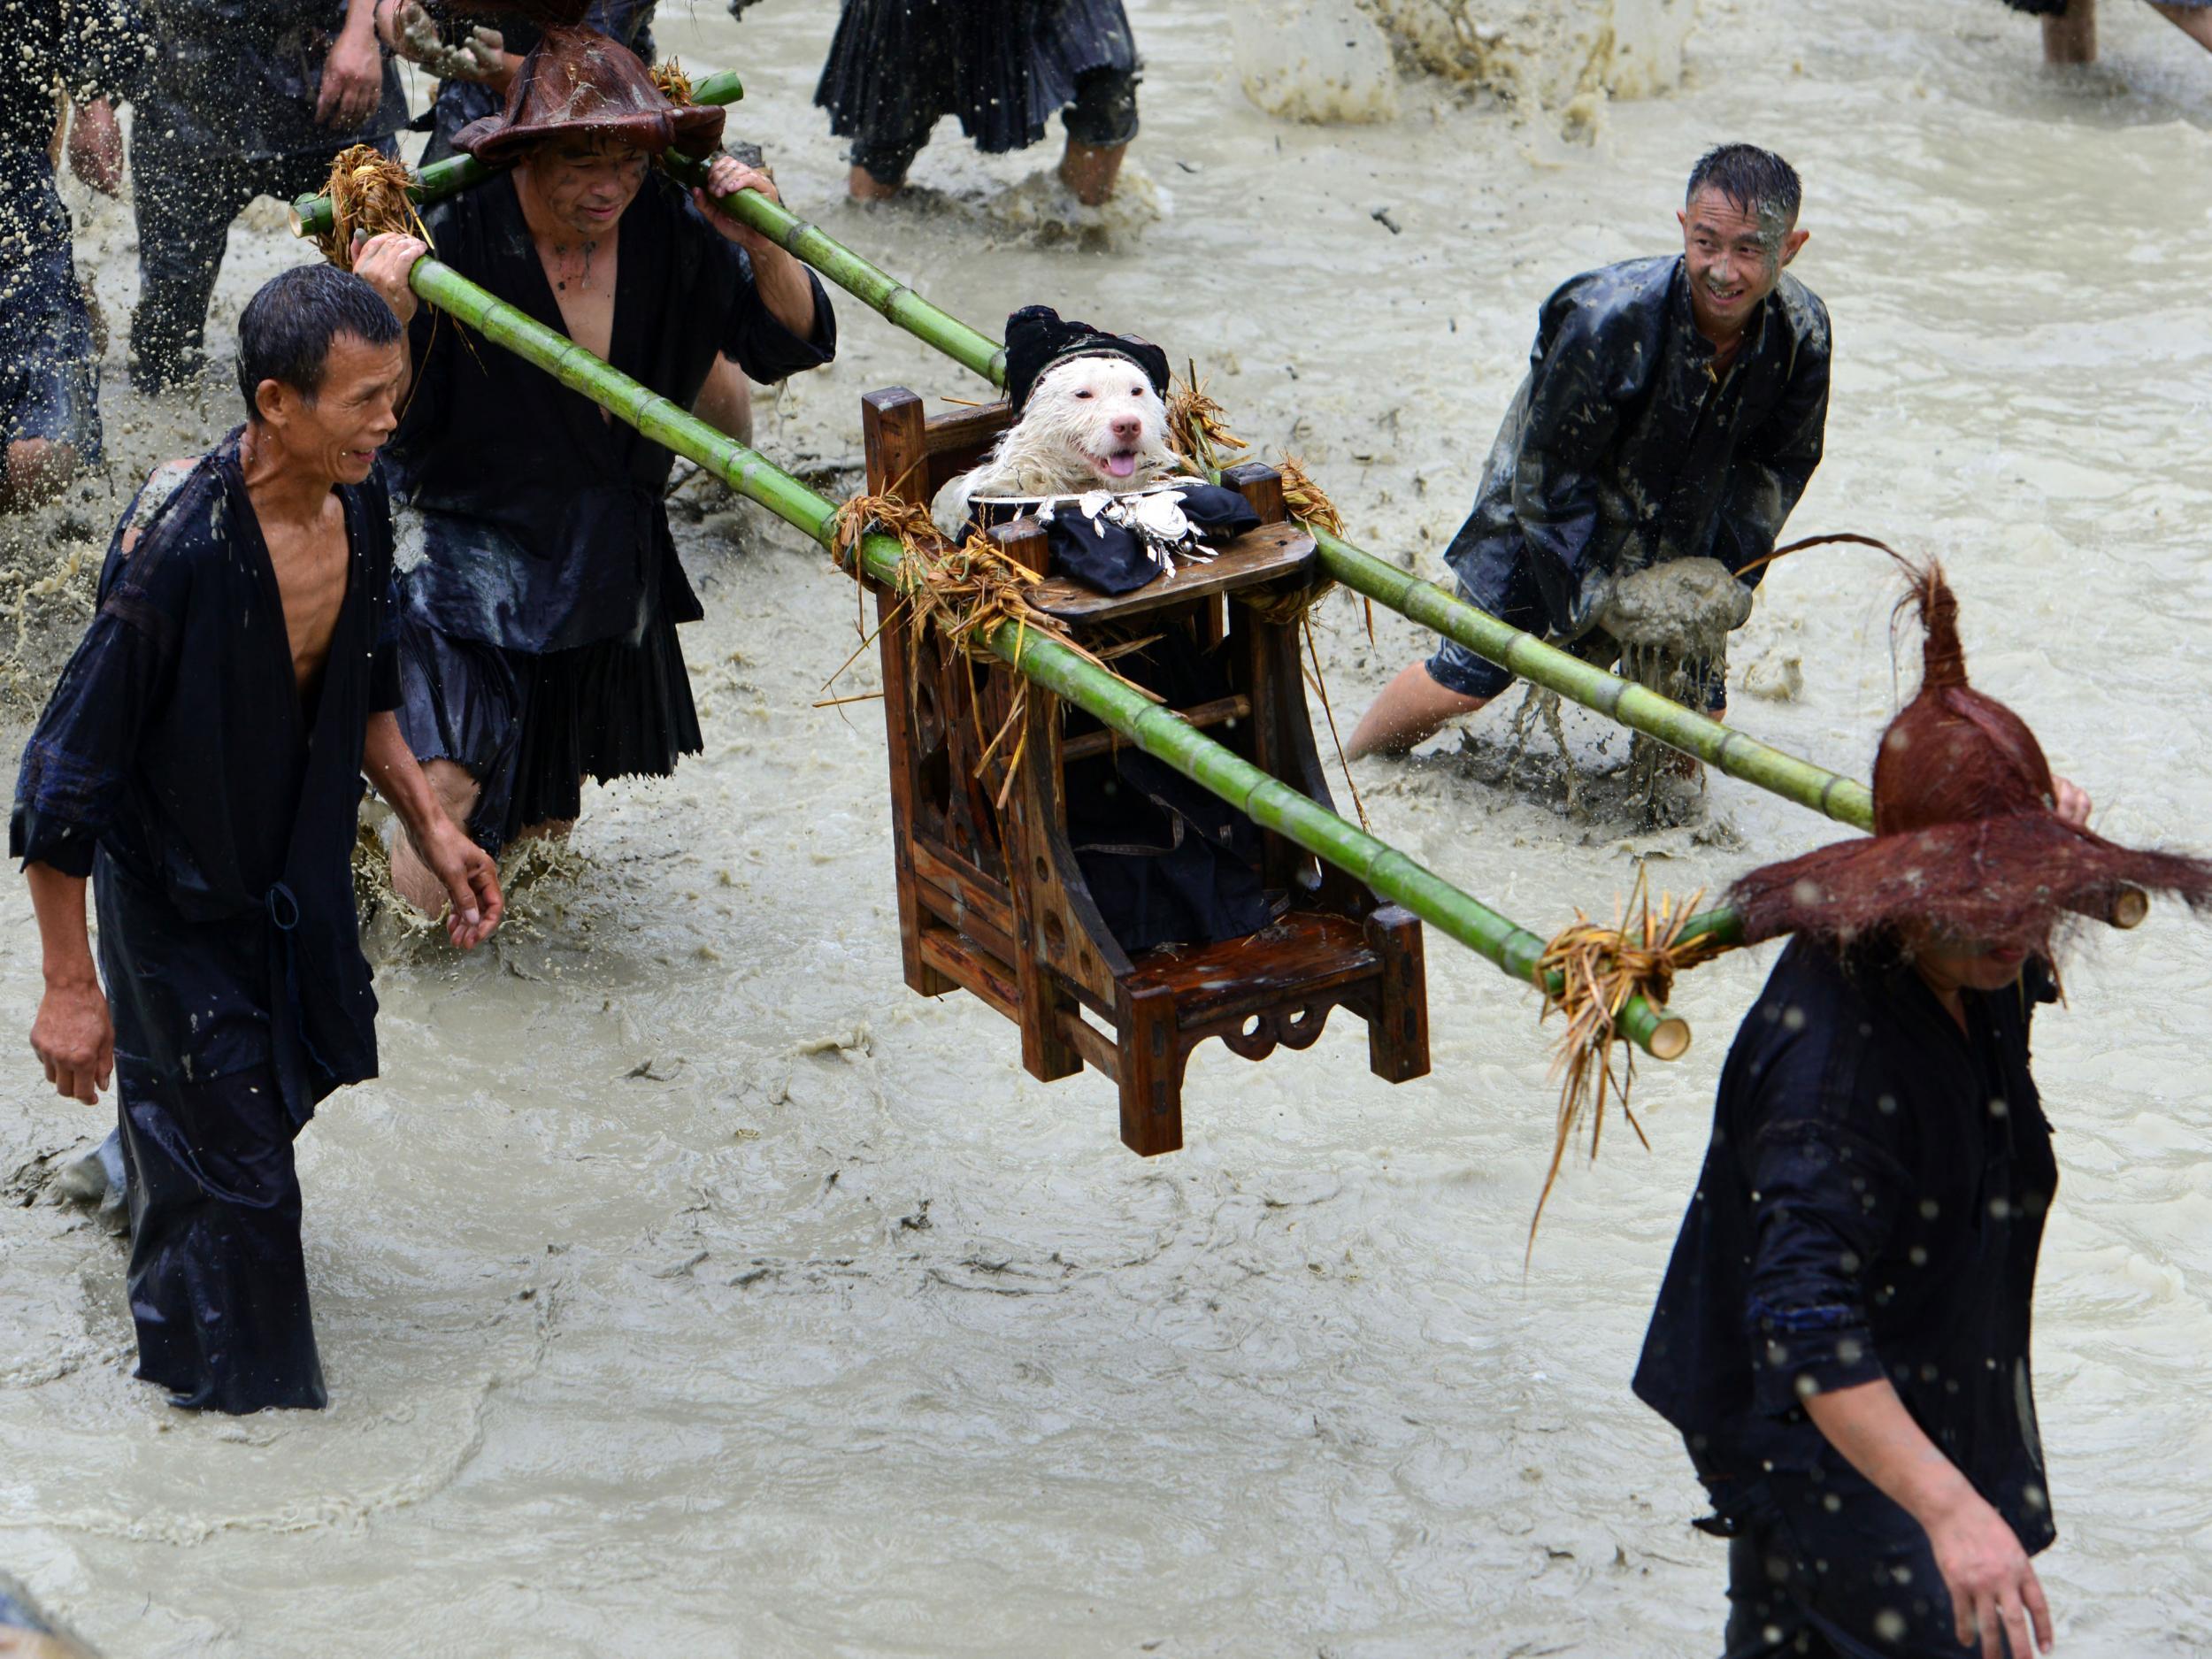 Local Chinese villagers carry a dog dressed in human clothes during a folk festival parade known as 'Dog carrying Day'